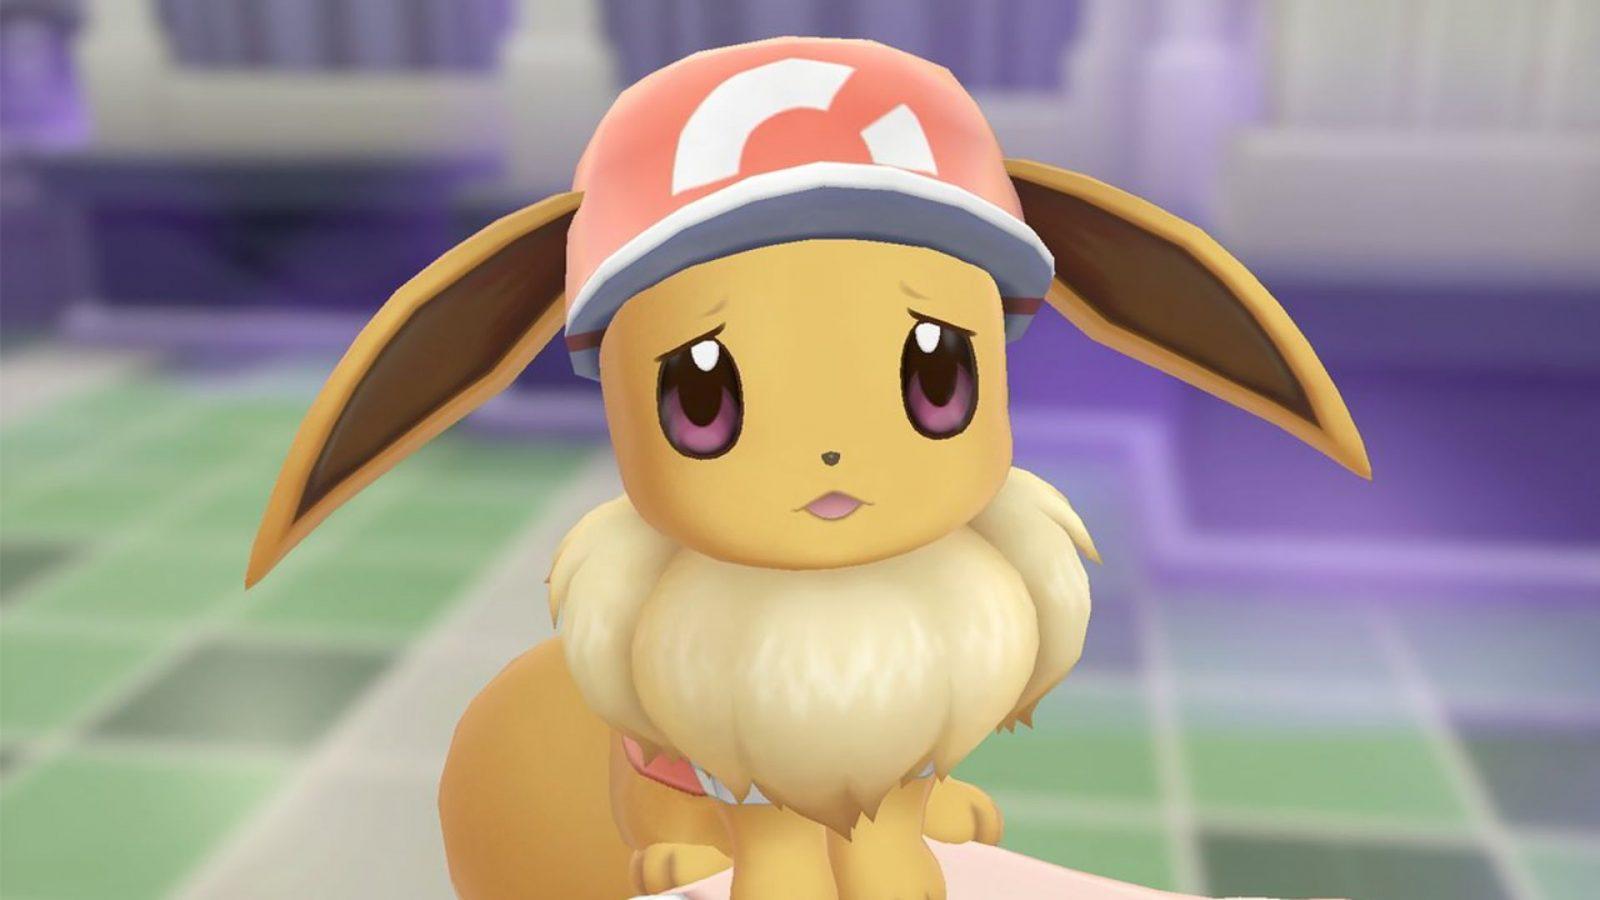 Pokemon Go players already miss “best event” of the year Dexerto